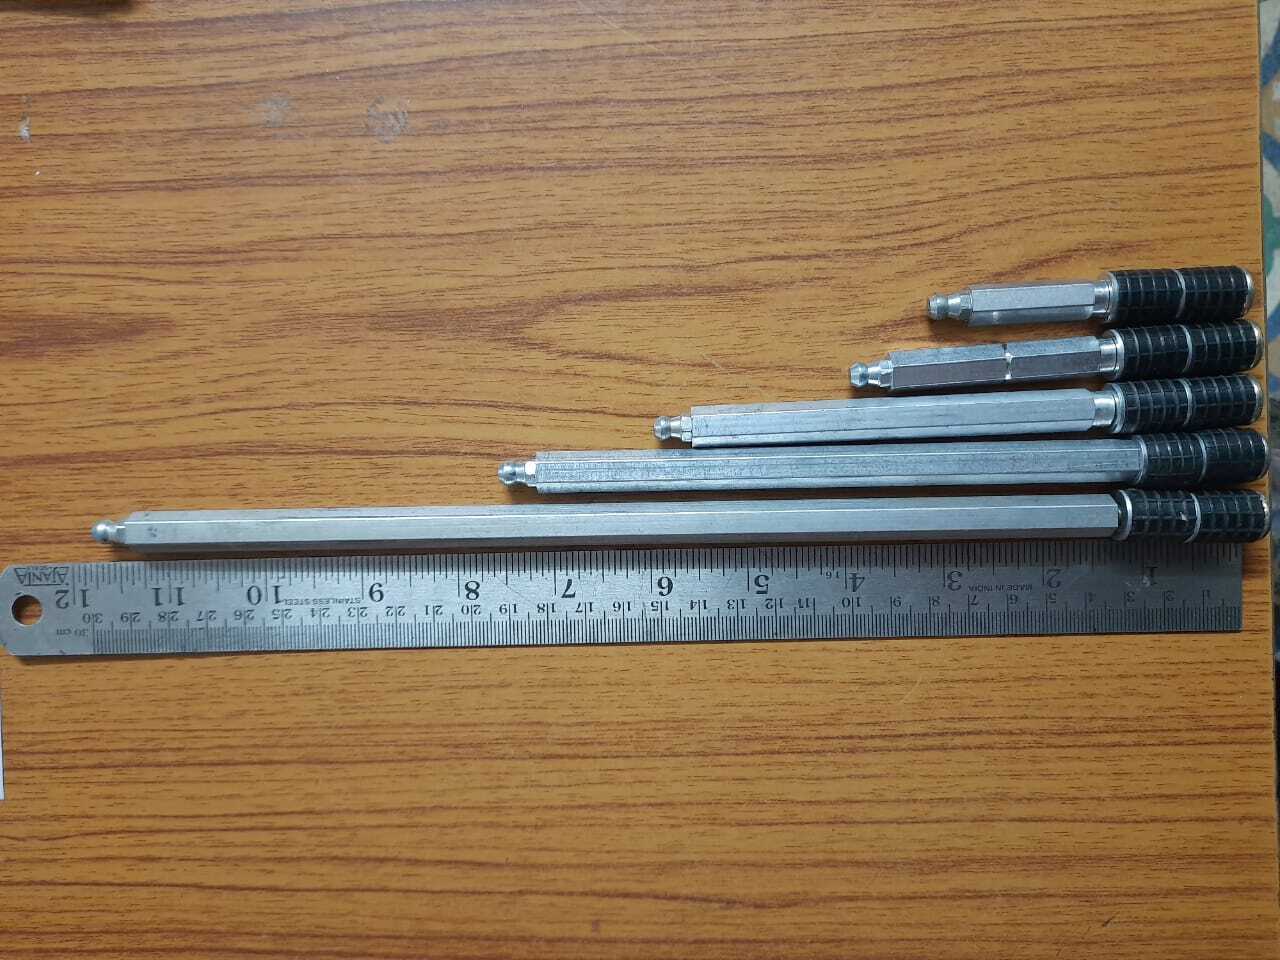 Stainless Steel Injection Packer